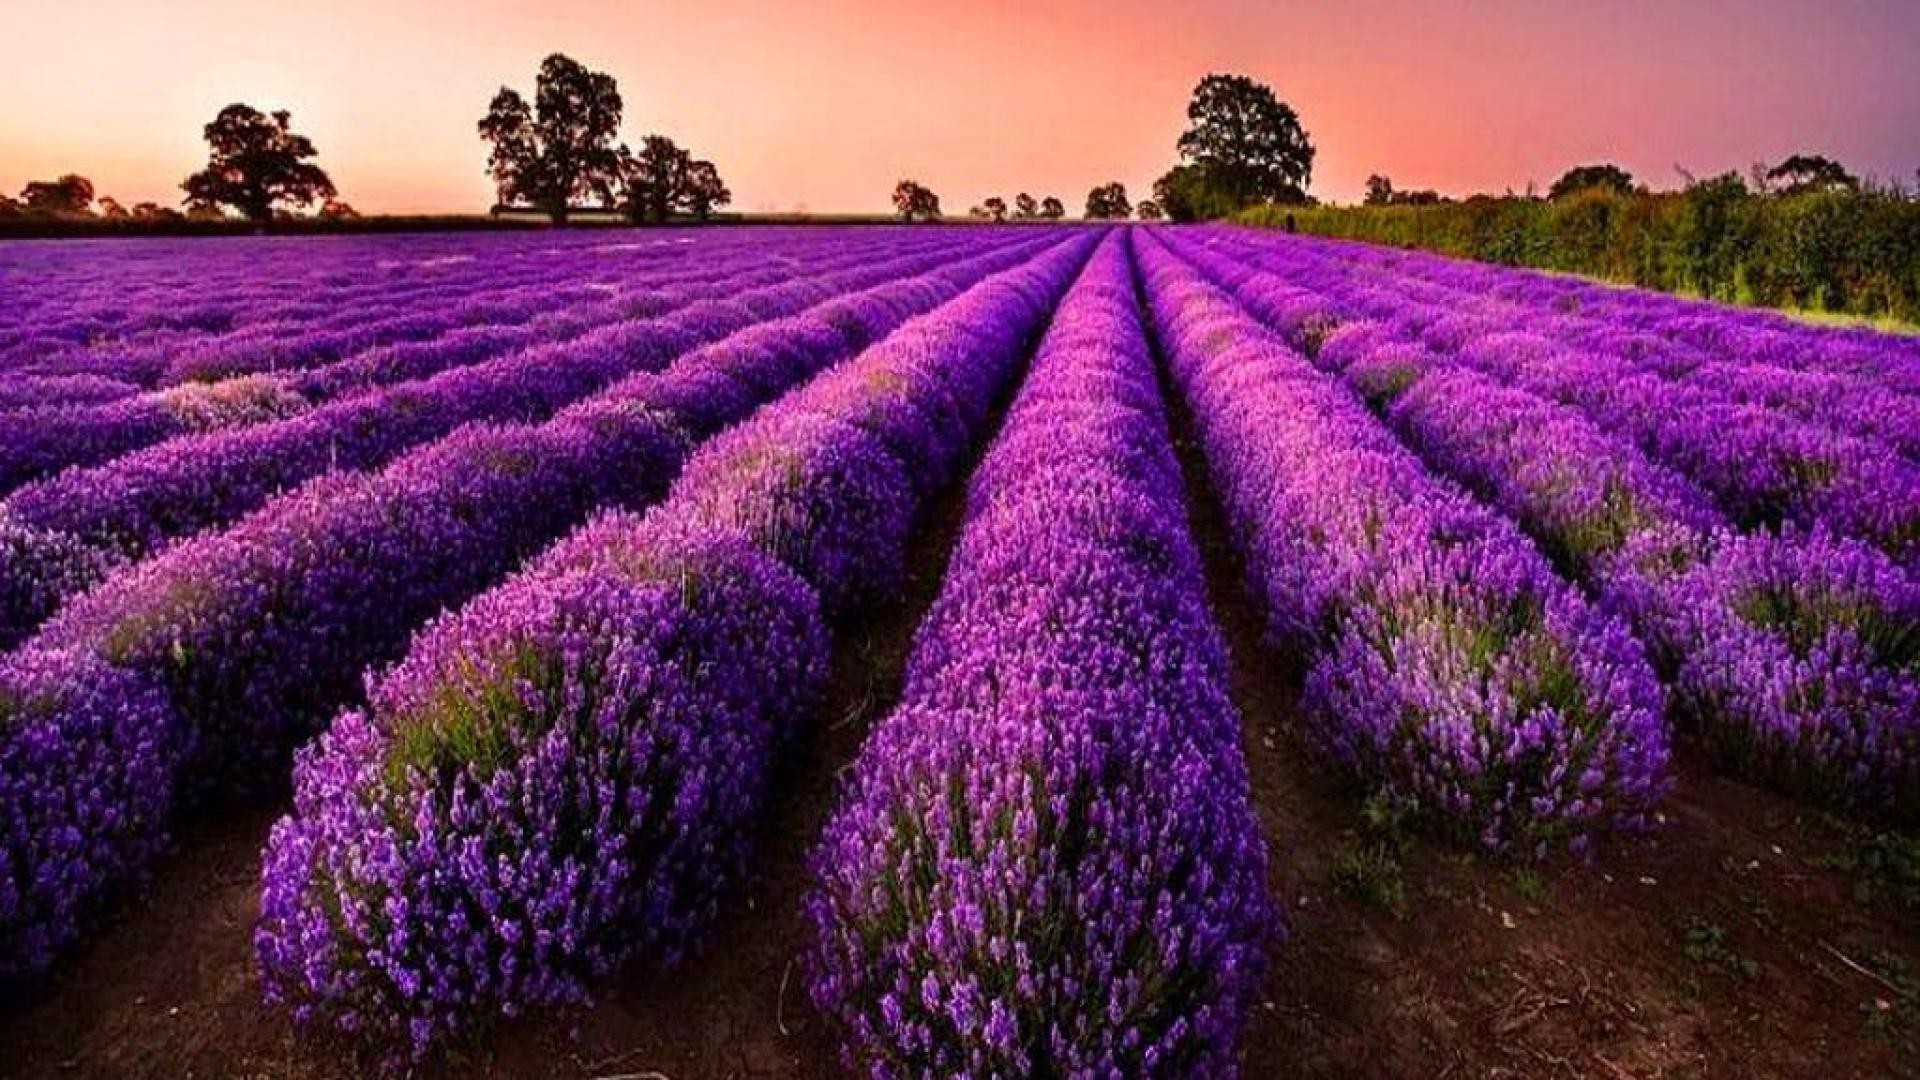 1920x1080 Purple Tag - Nature Purple Flower Field Rows Lavender Fields Image for HD  16:9